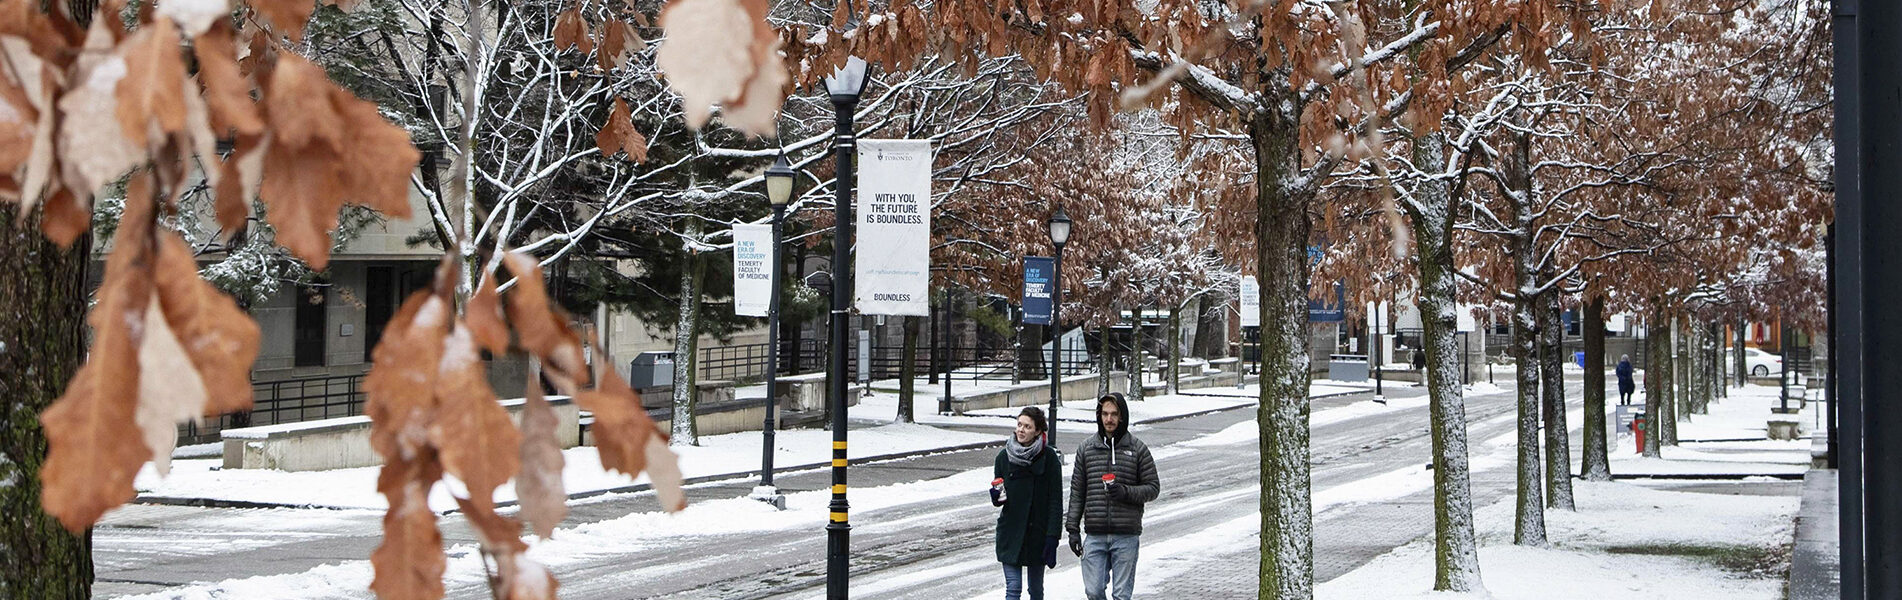 Two students walk with coffees on snowy St. George Street